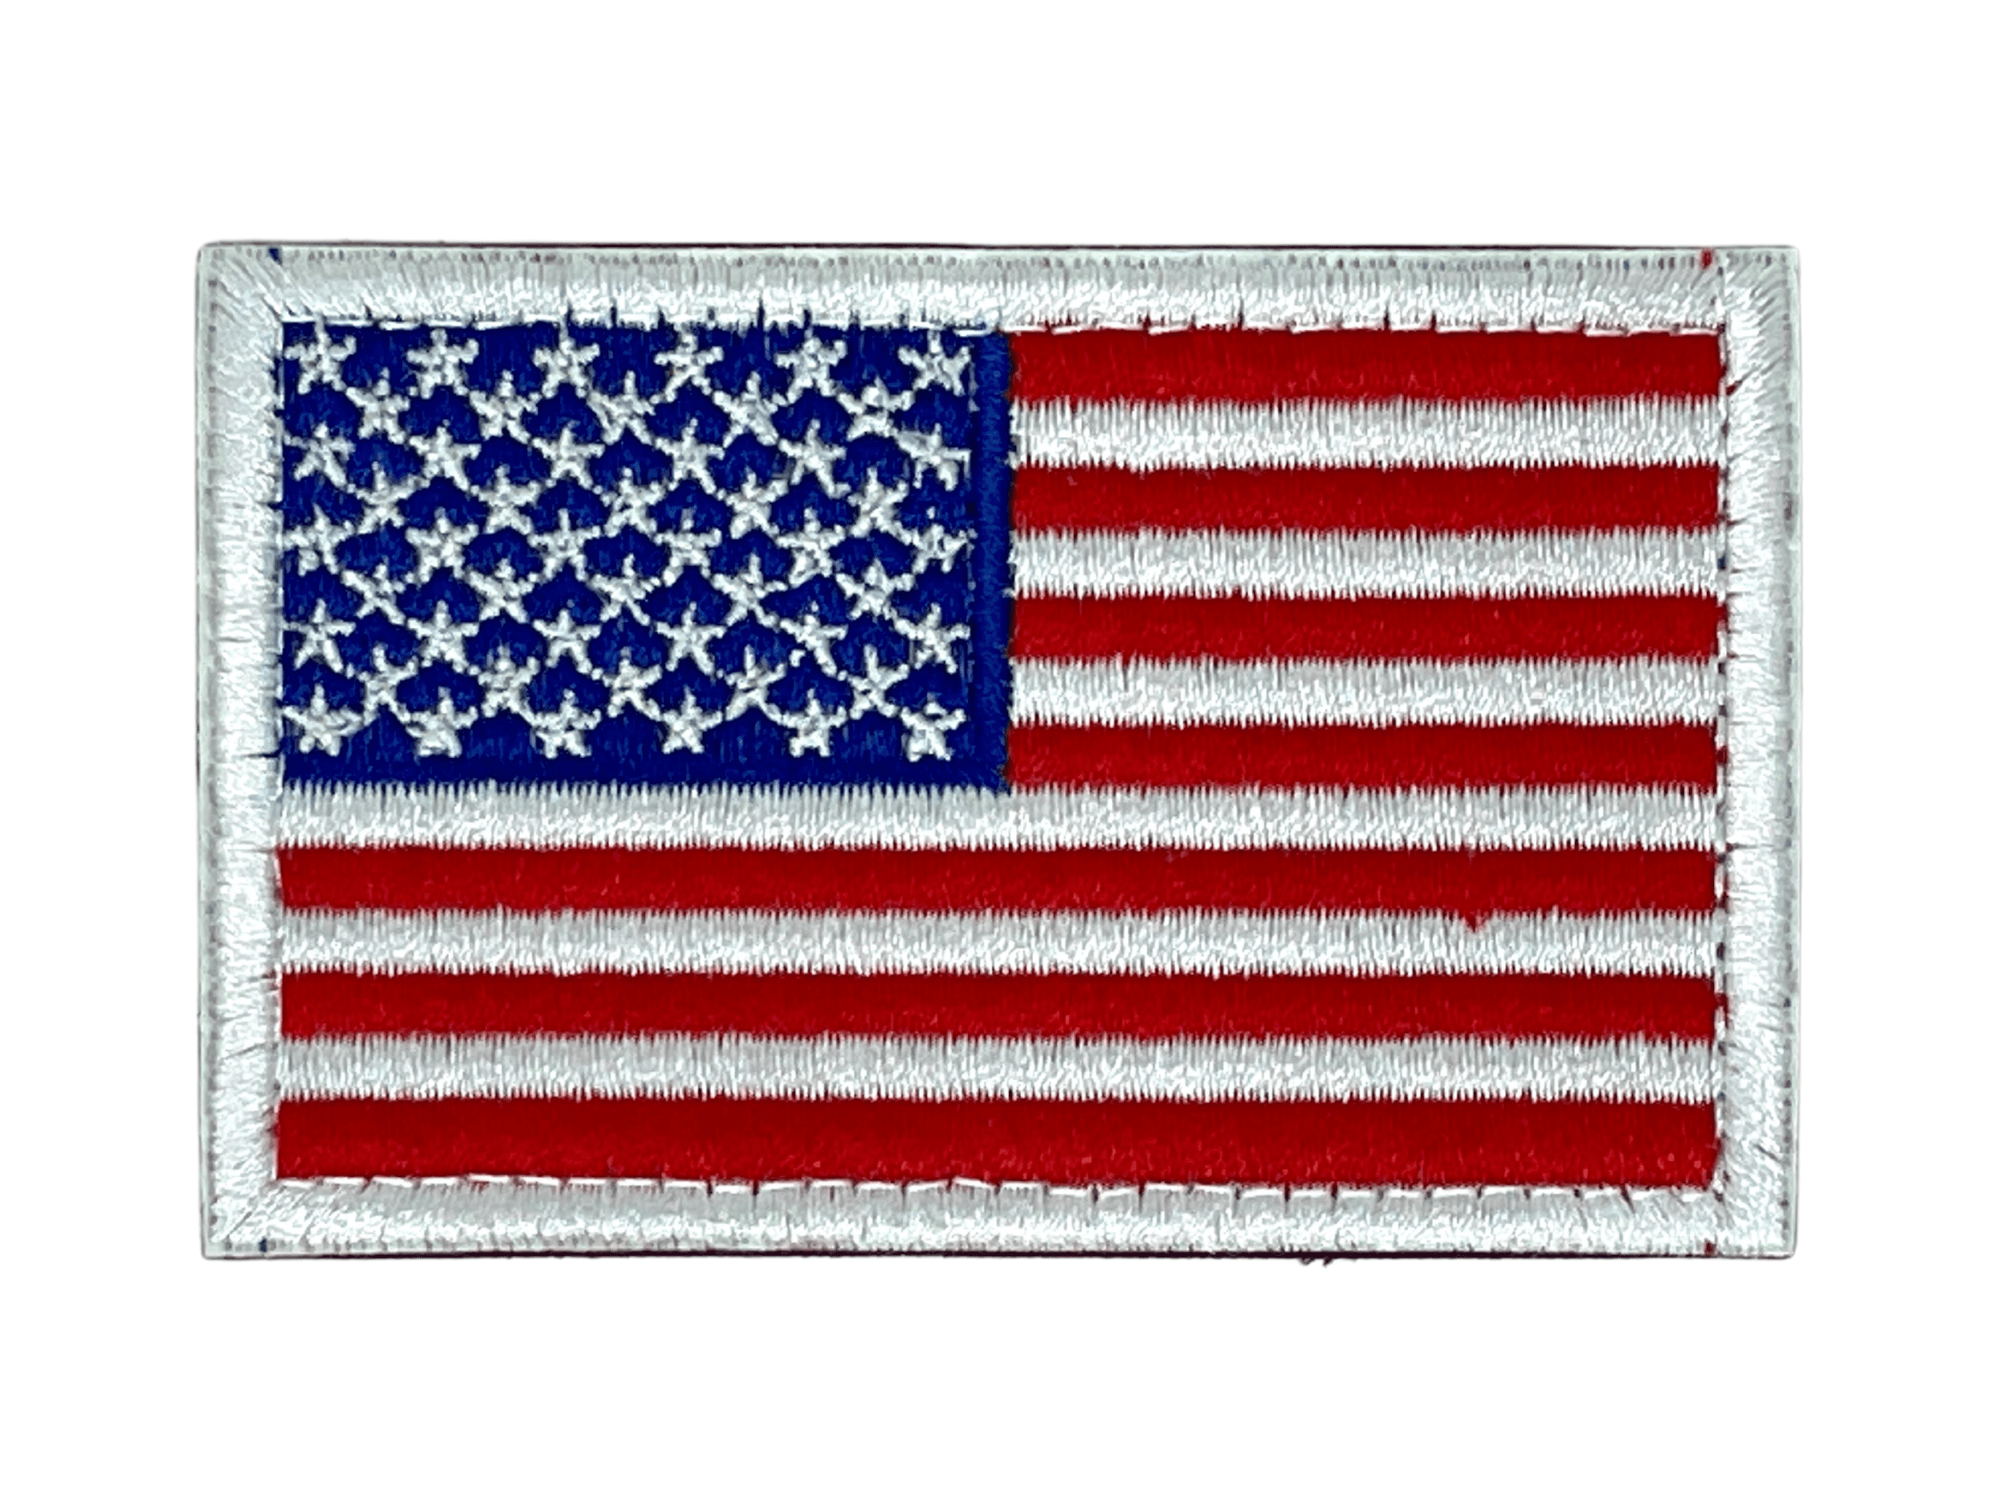 Tactical USA Flag Patch with Velcro Backing 